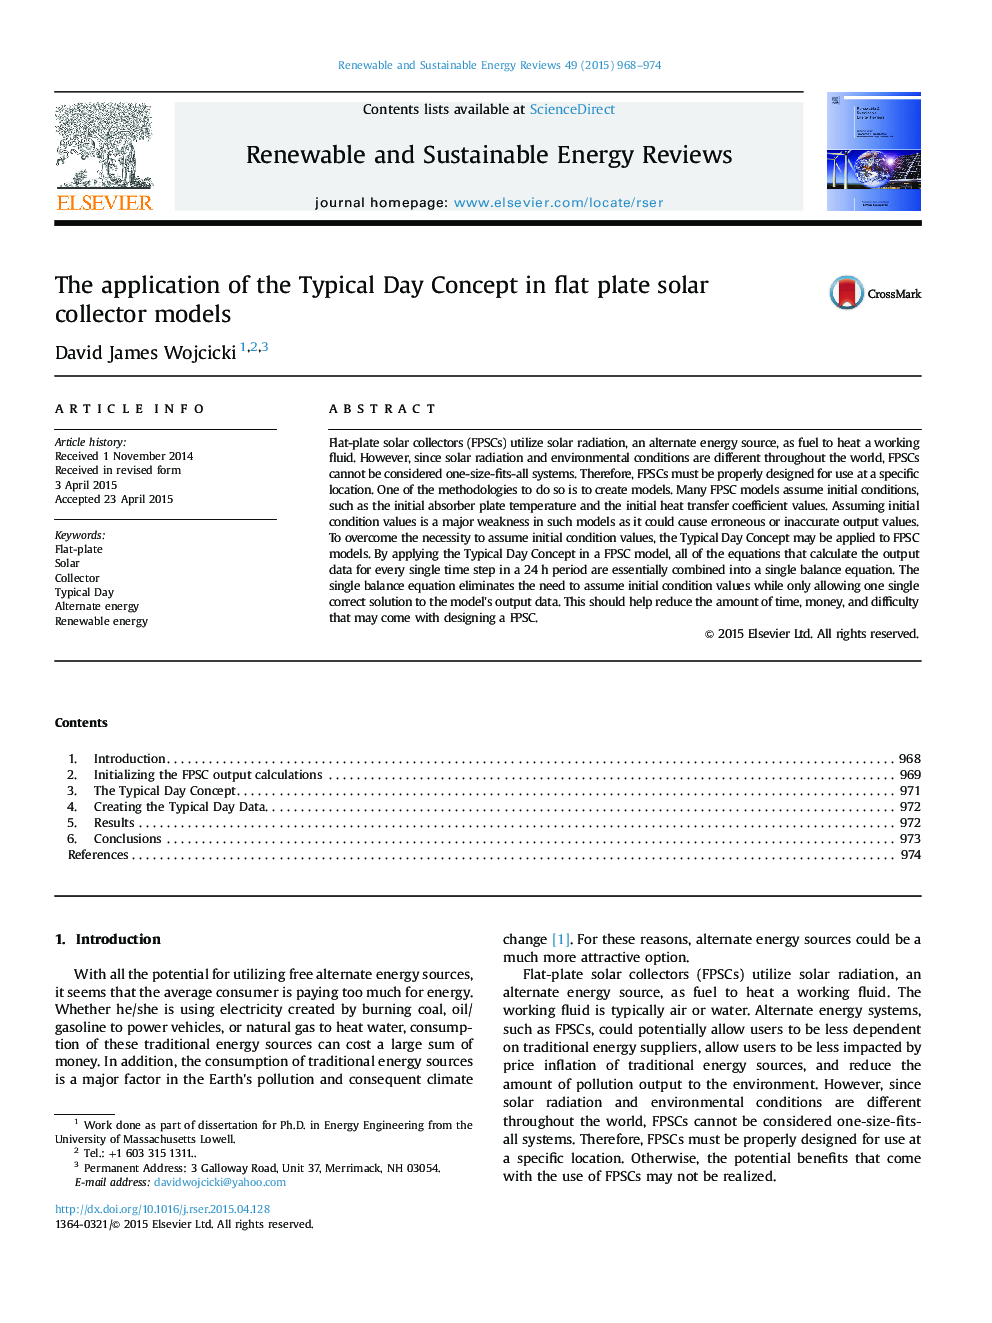 The application of the Typical Day Concept in flat plate solar collector models